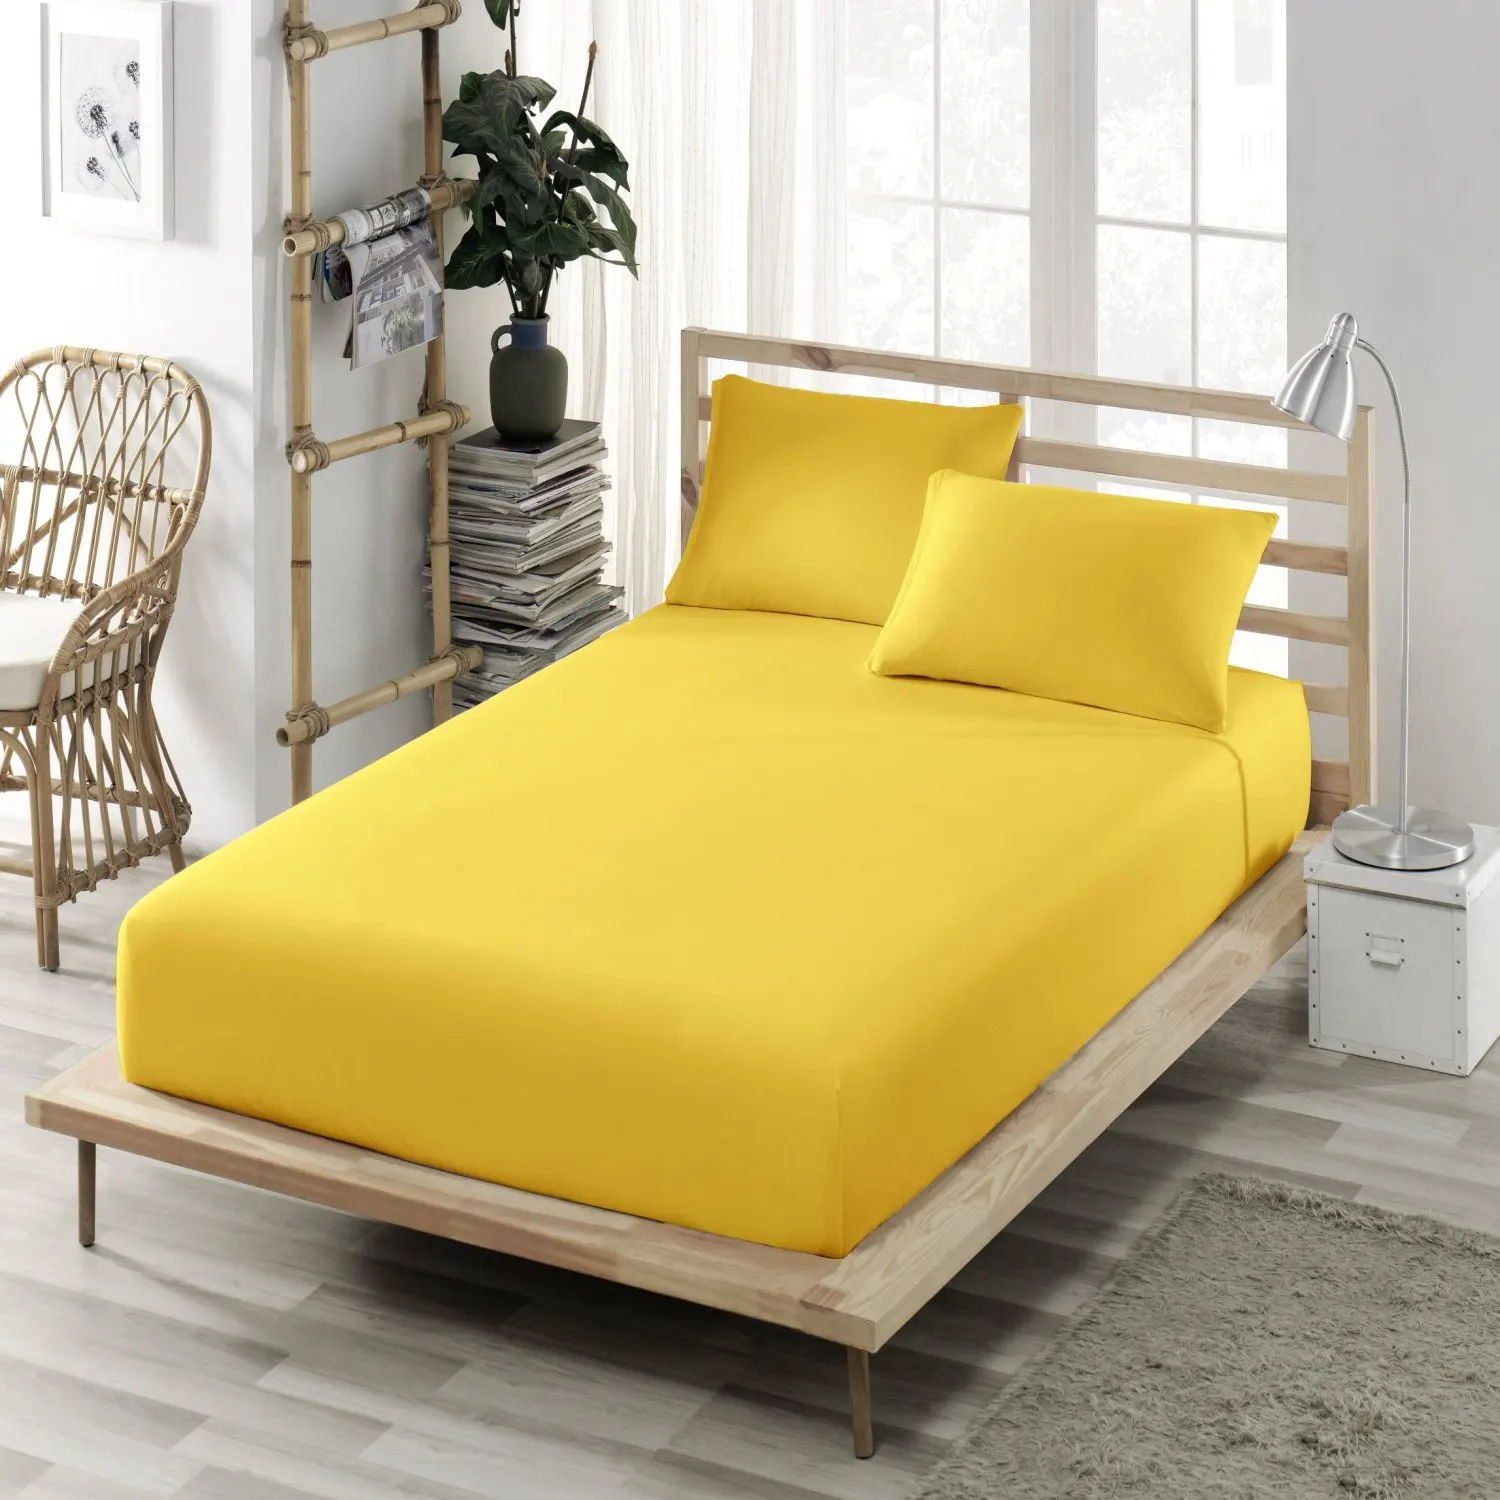 

Fitted Bed Sheets-Linen Cotton Fabric (Ranforce)-All Sizes-King Size-Double-Queen-Twin-Mattress Cover Soft-Yellow